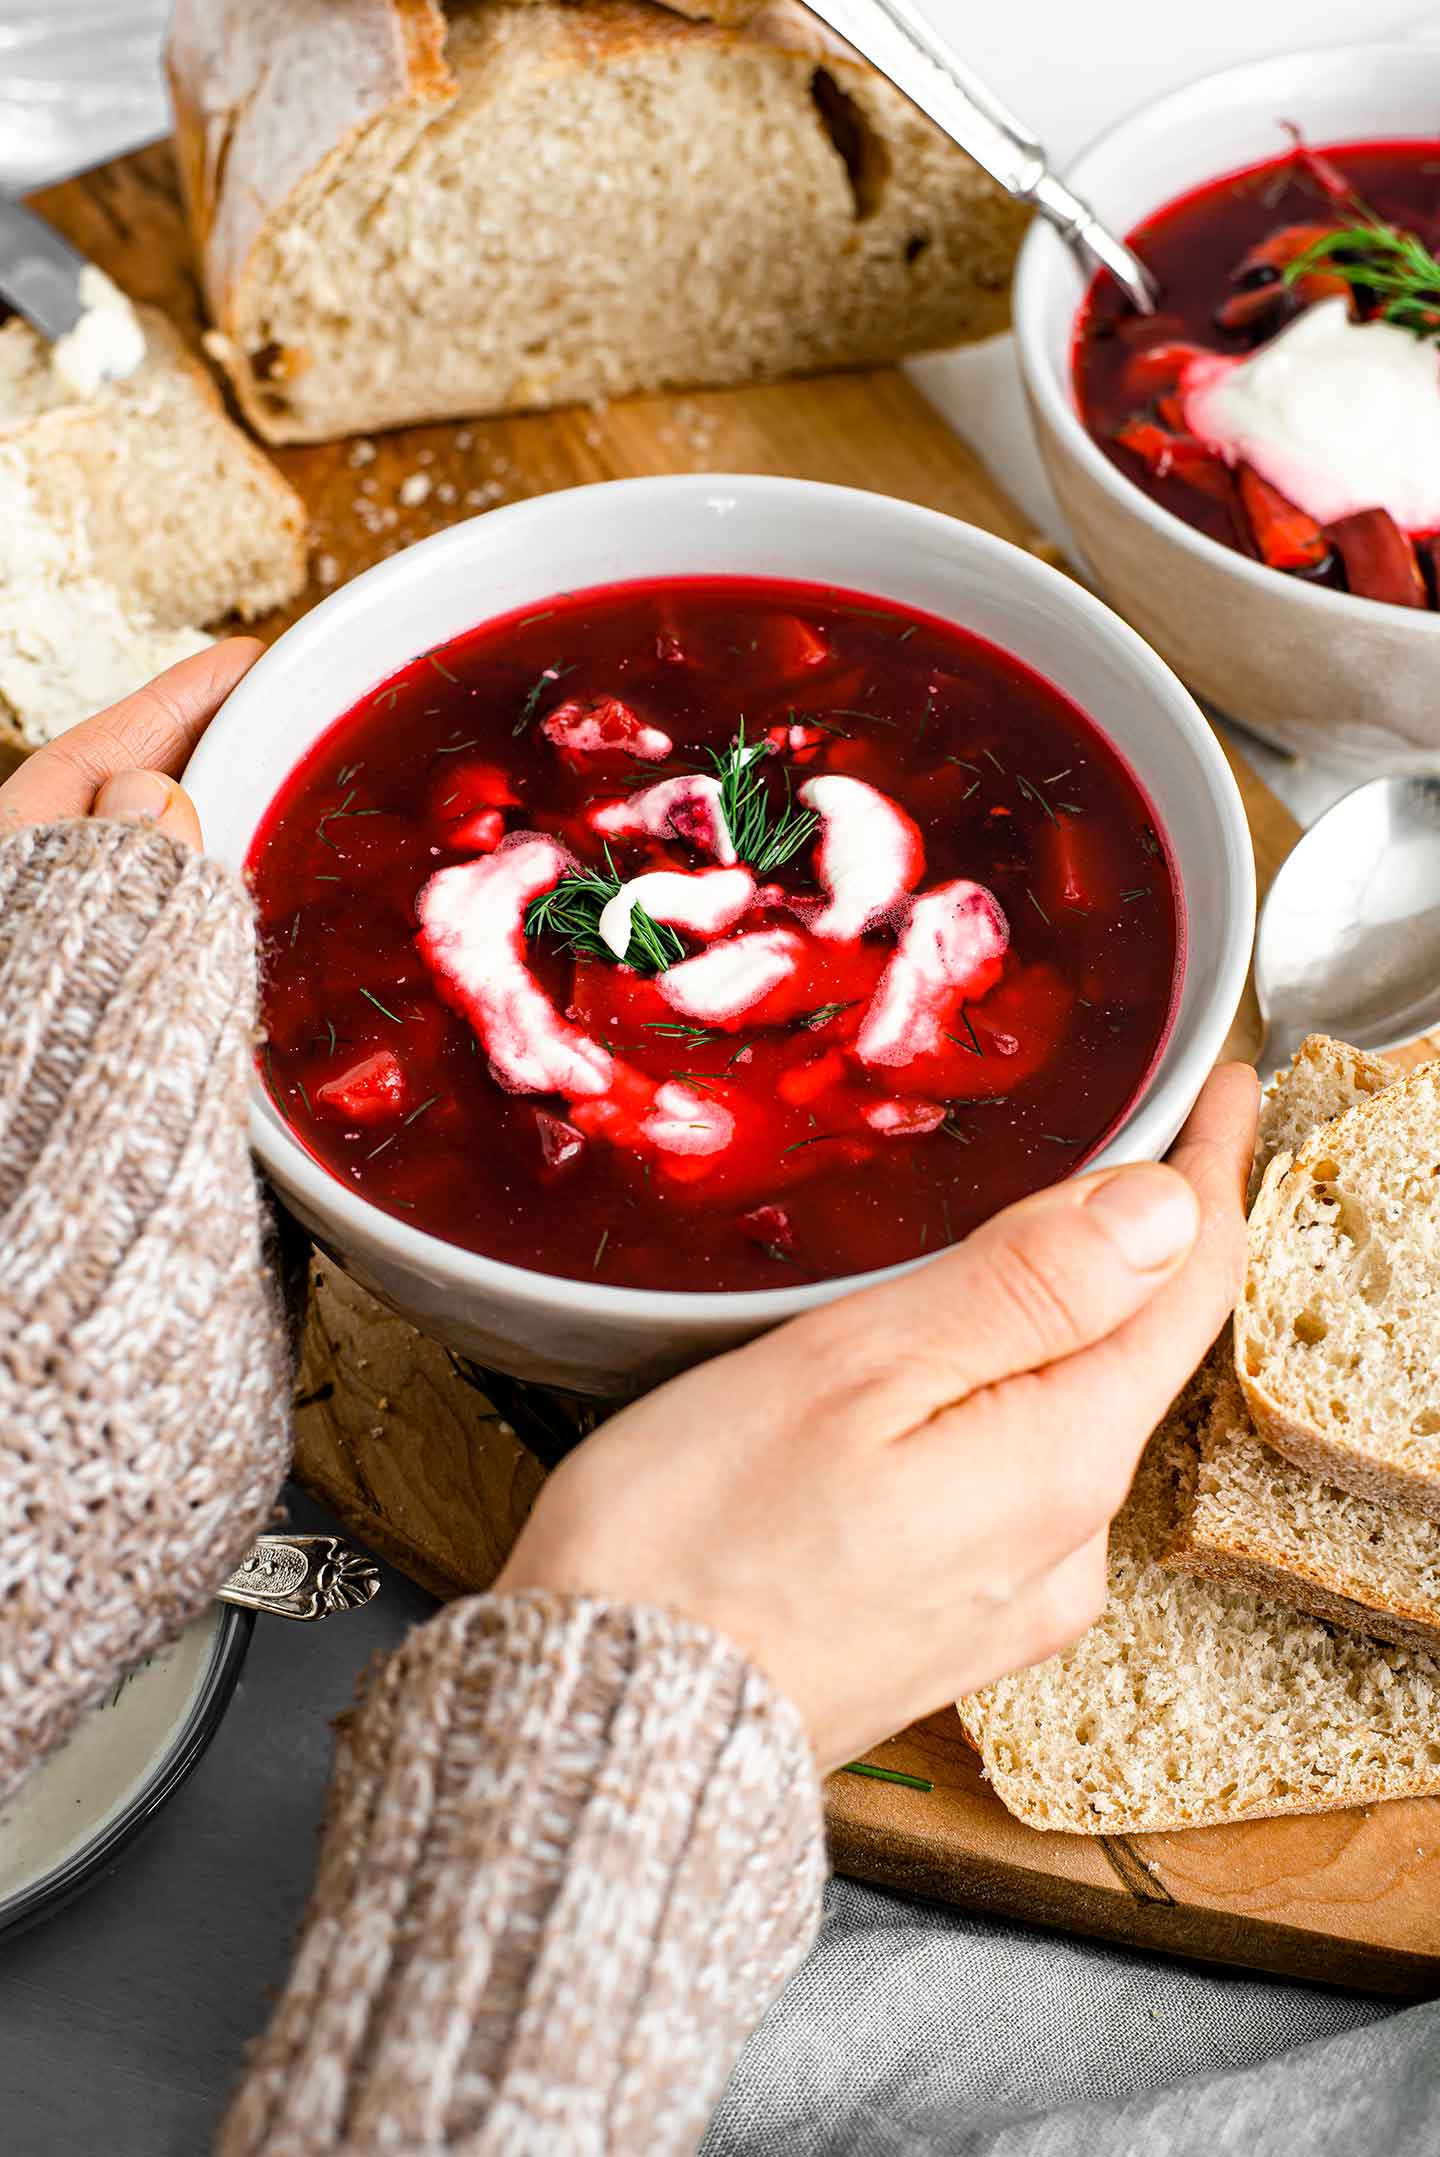 Side view of hands warming on the side of a large bowl of vegan borscht. Vegan sour cream is swirled through the red soup, fresh dill garnishes, and fresh bed surrounds the bowl.